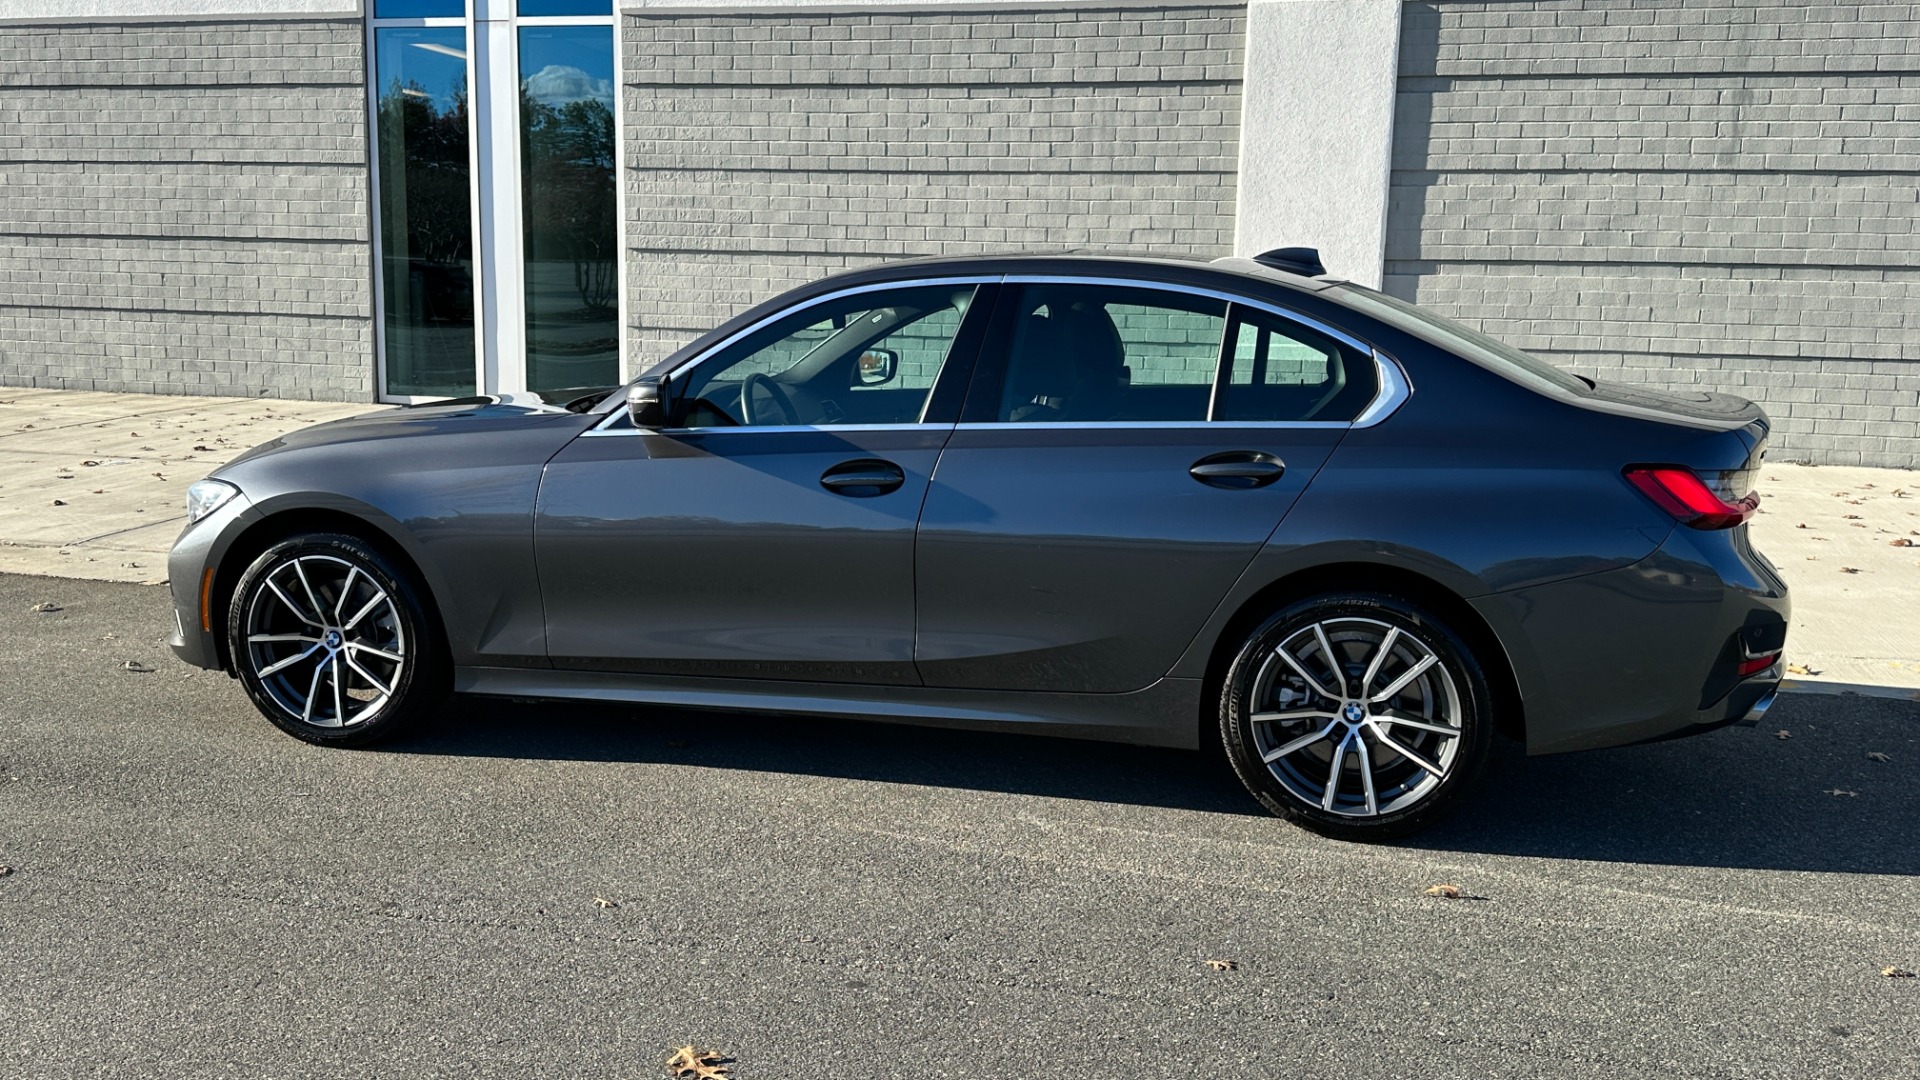 Used 2020 BMW 3 Series 330i xDRIVE / CONVENIENCE / HEATED SEATS / AMBIENT LIGHTING / REMOTE START for sale $36,995 at Formula Imports in Charlotte NC 28227 6